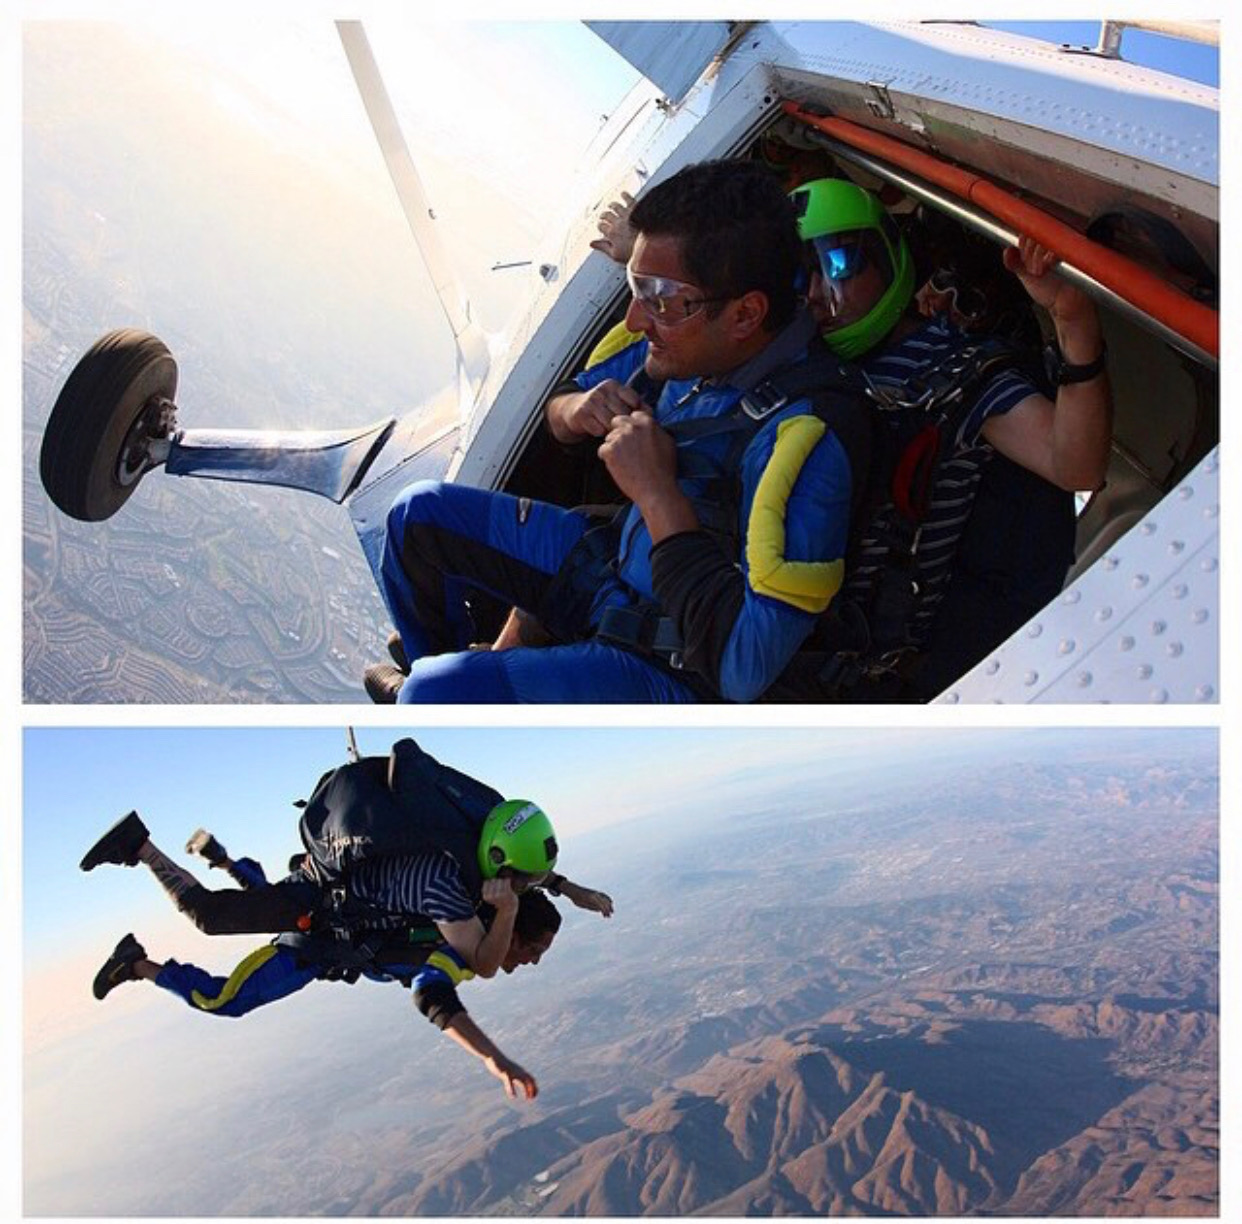 Skydiving Fear of heights